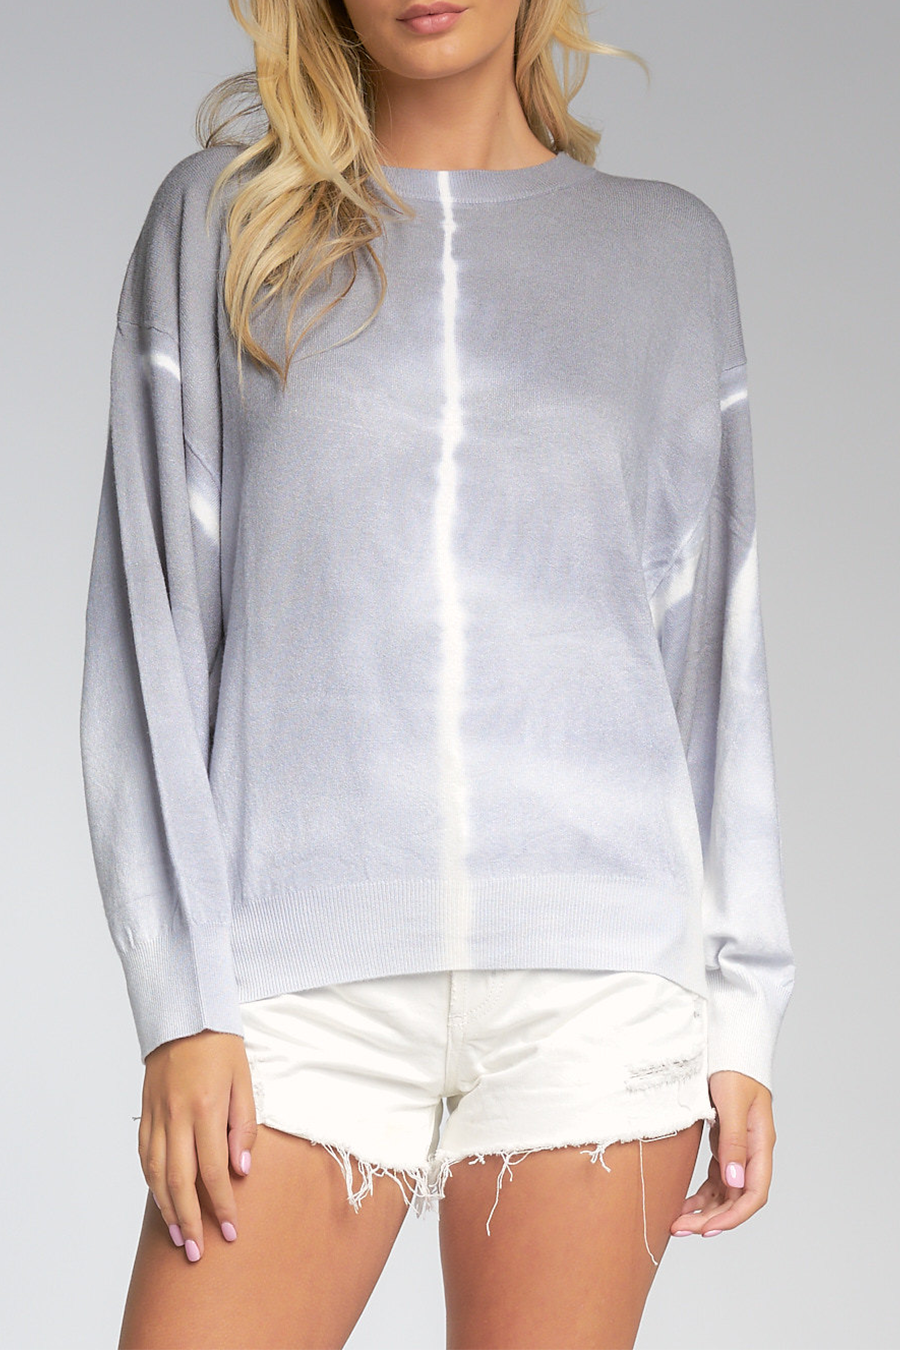 Tie Dye Crew Neck Sweater | Ash Grey O/S - Main Image Number 1 of 2